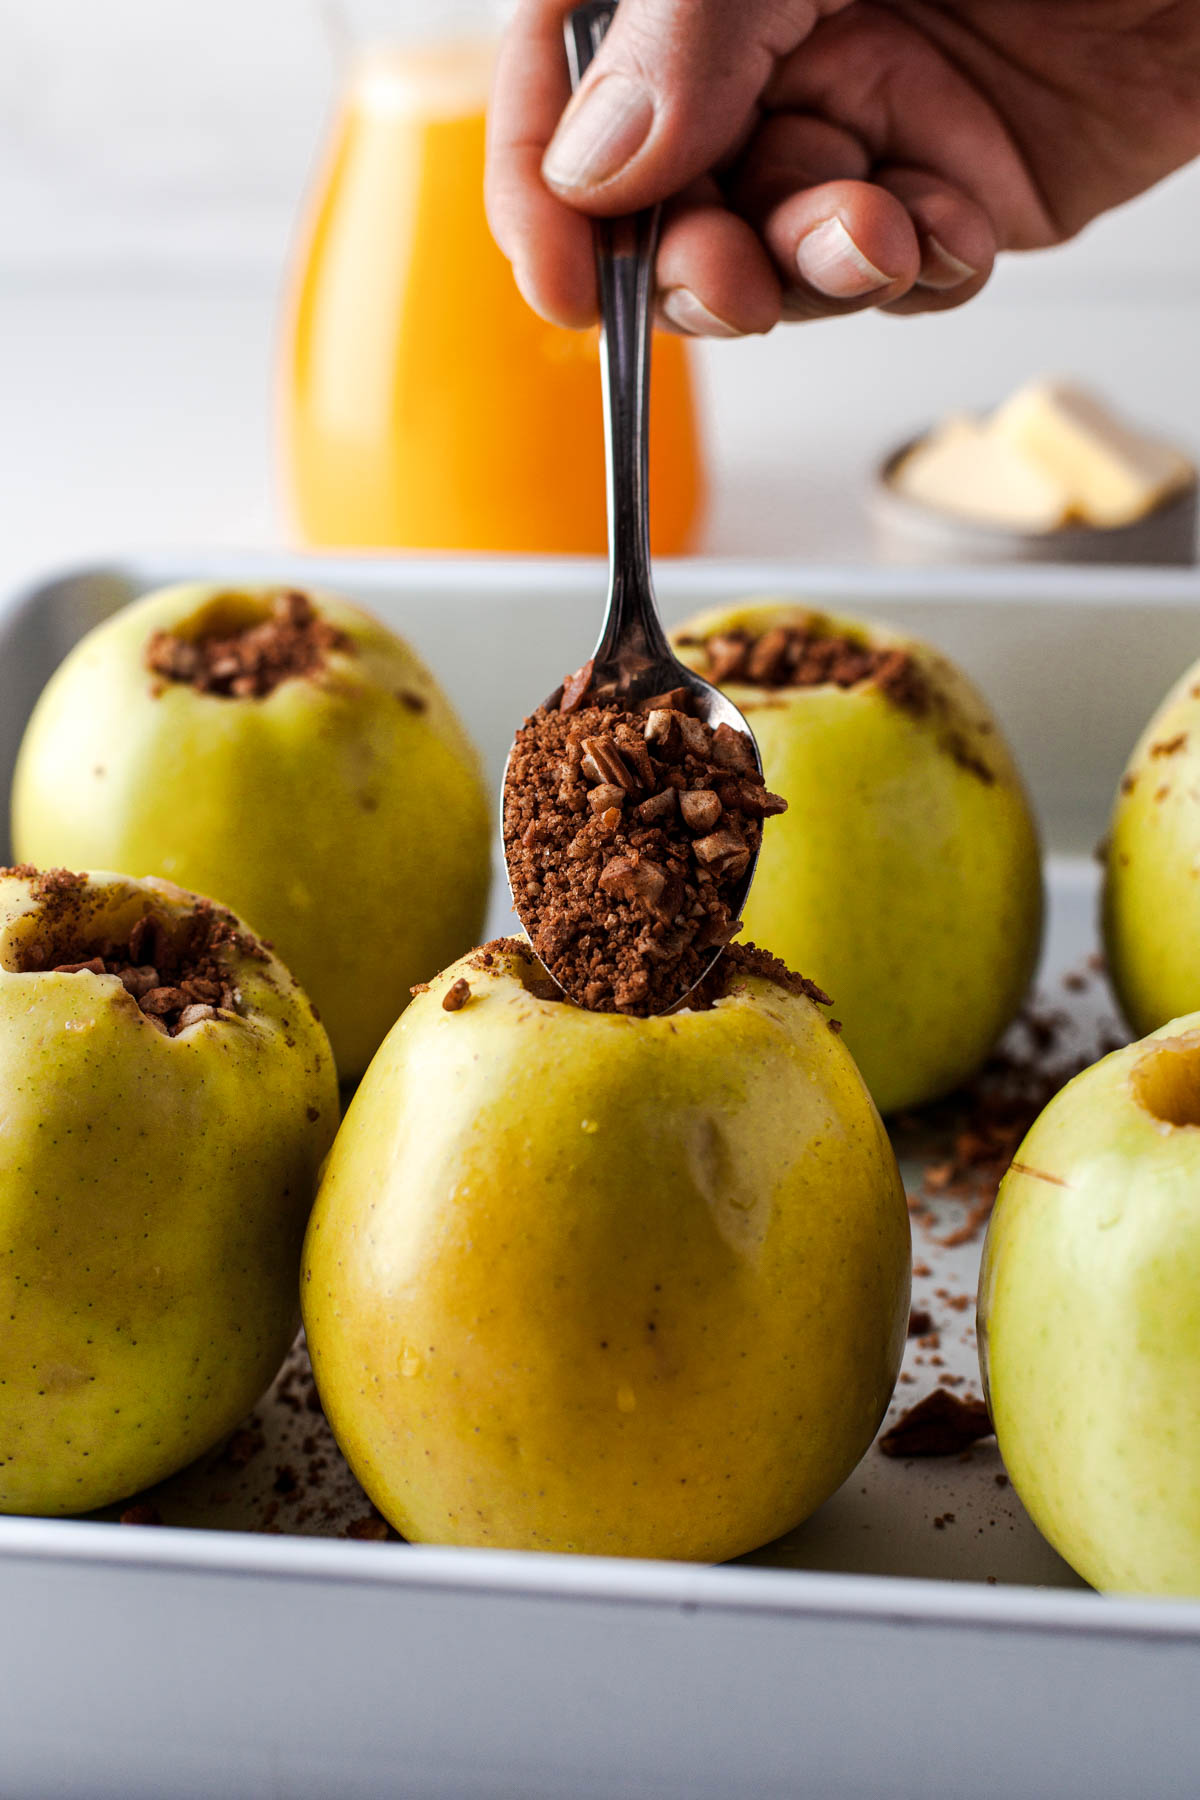 A spoon drops crumble filling into an unbaked green apple.